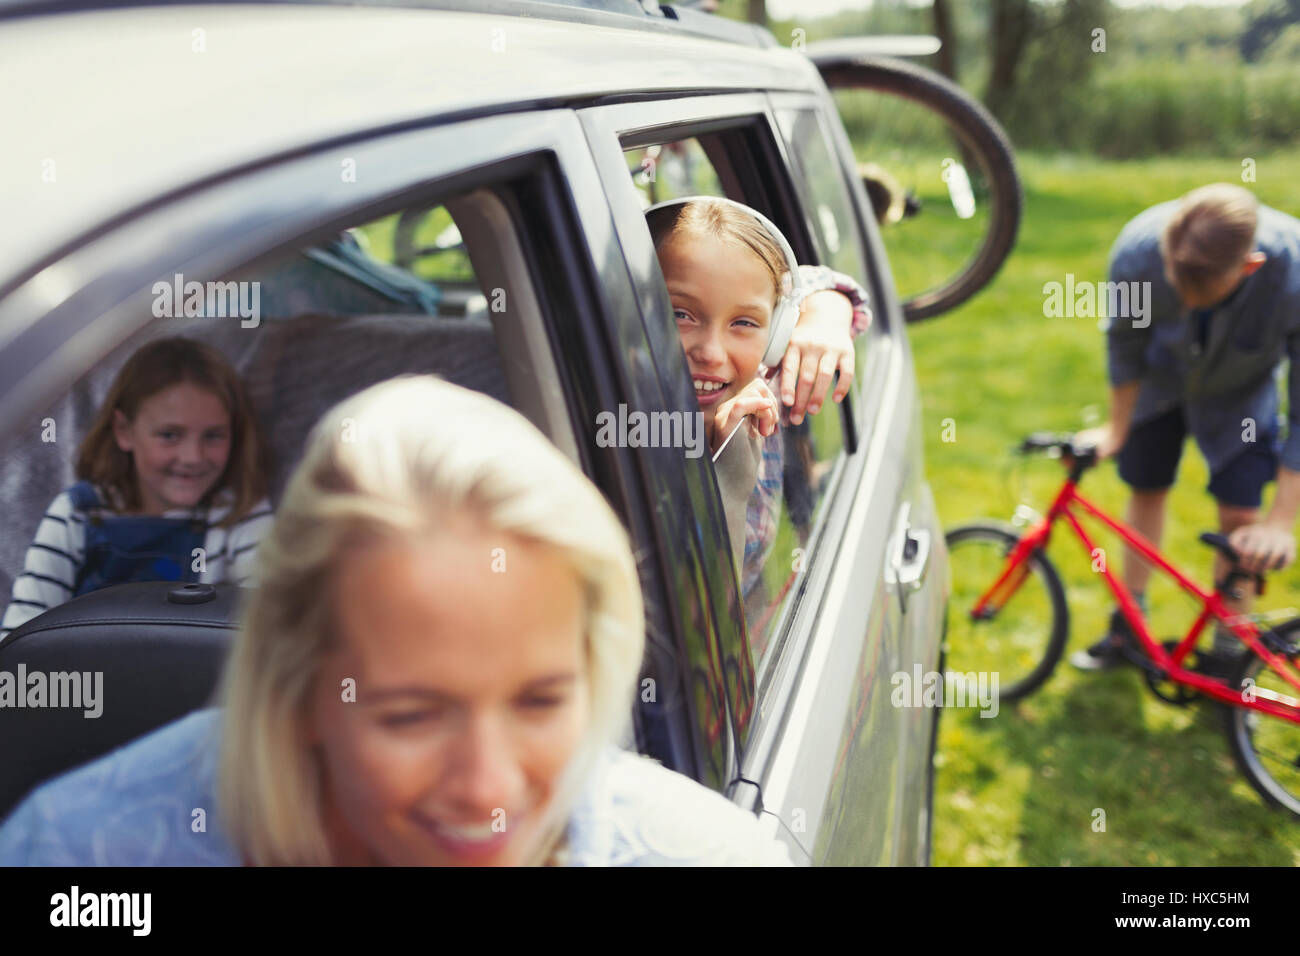 Portrait smiling girl with family inside car Stock Photo